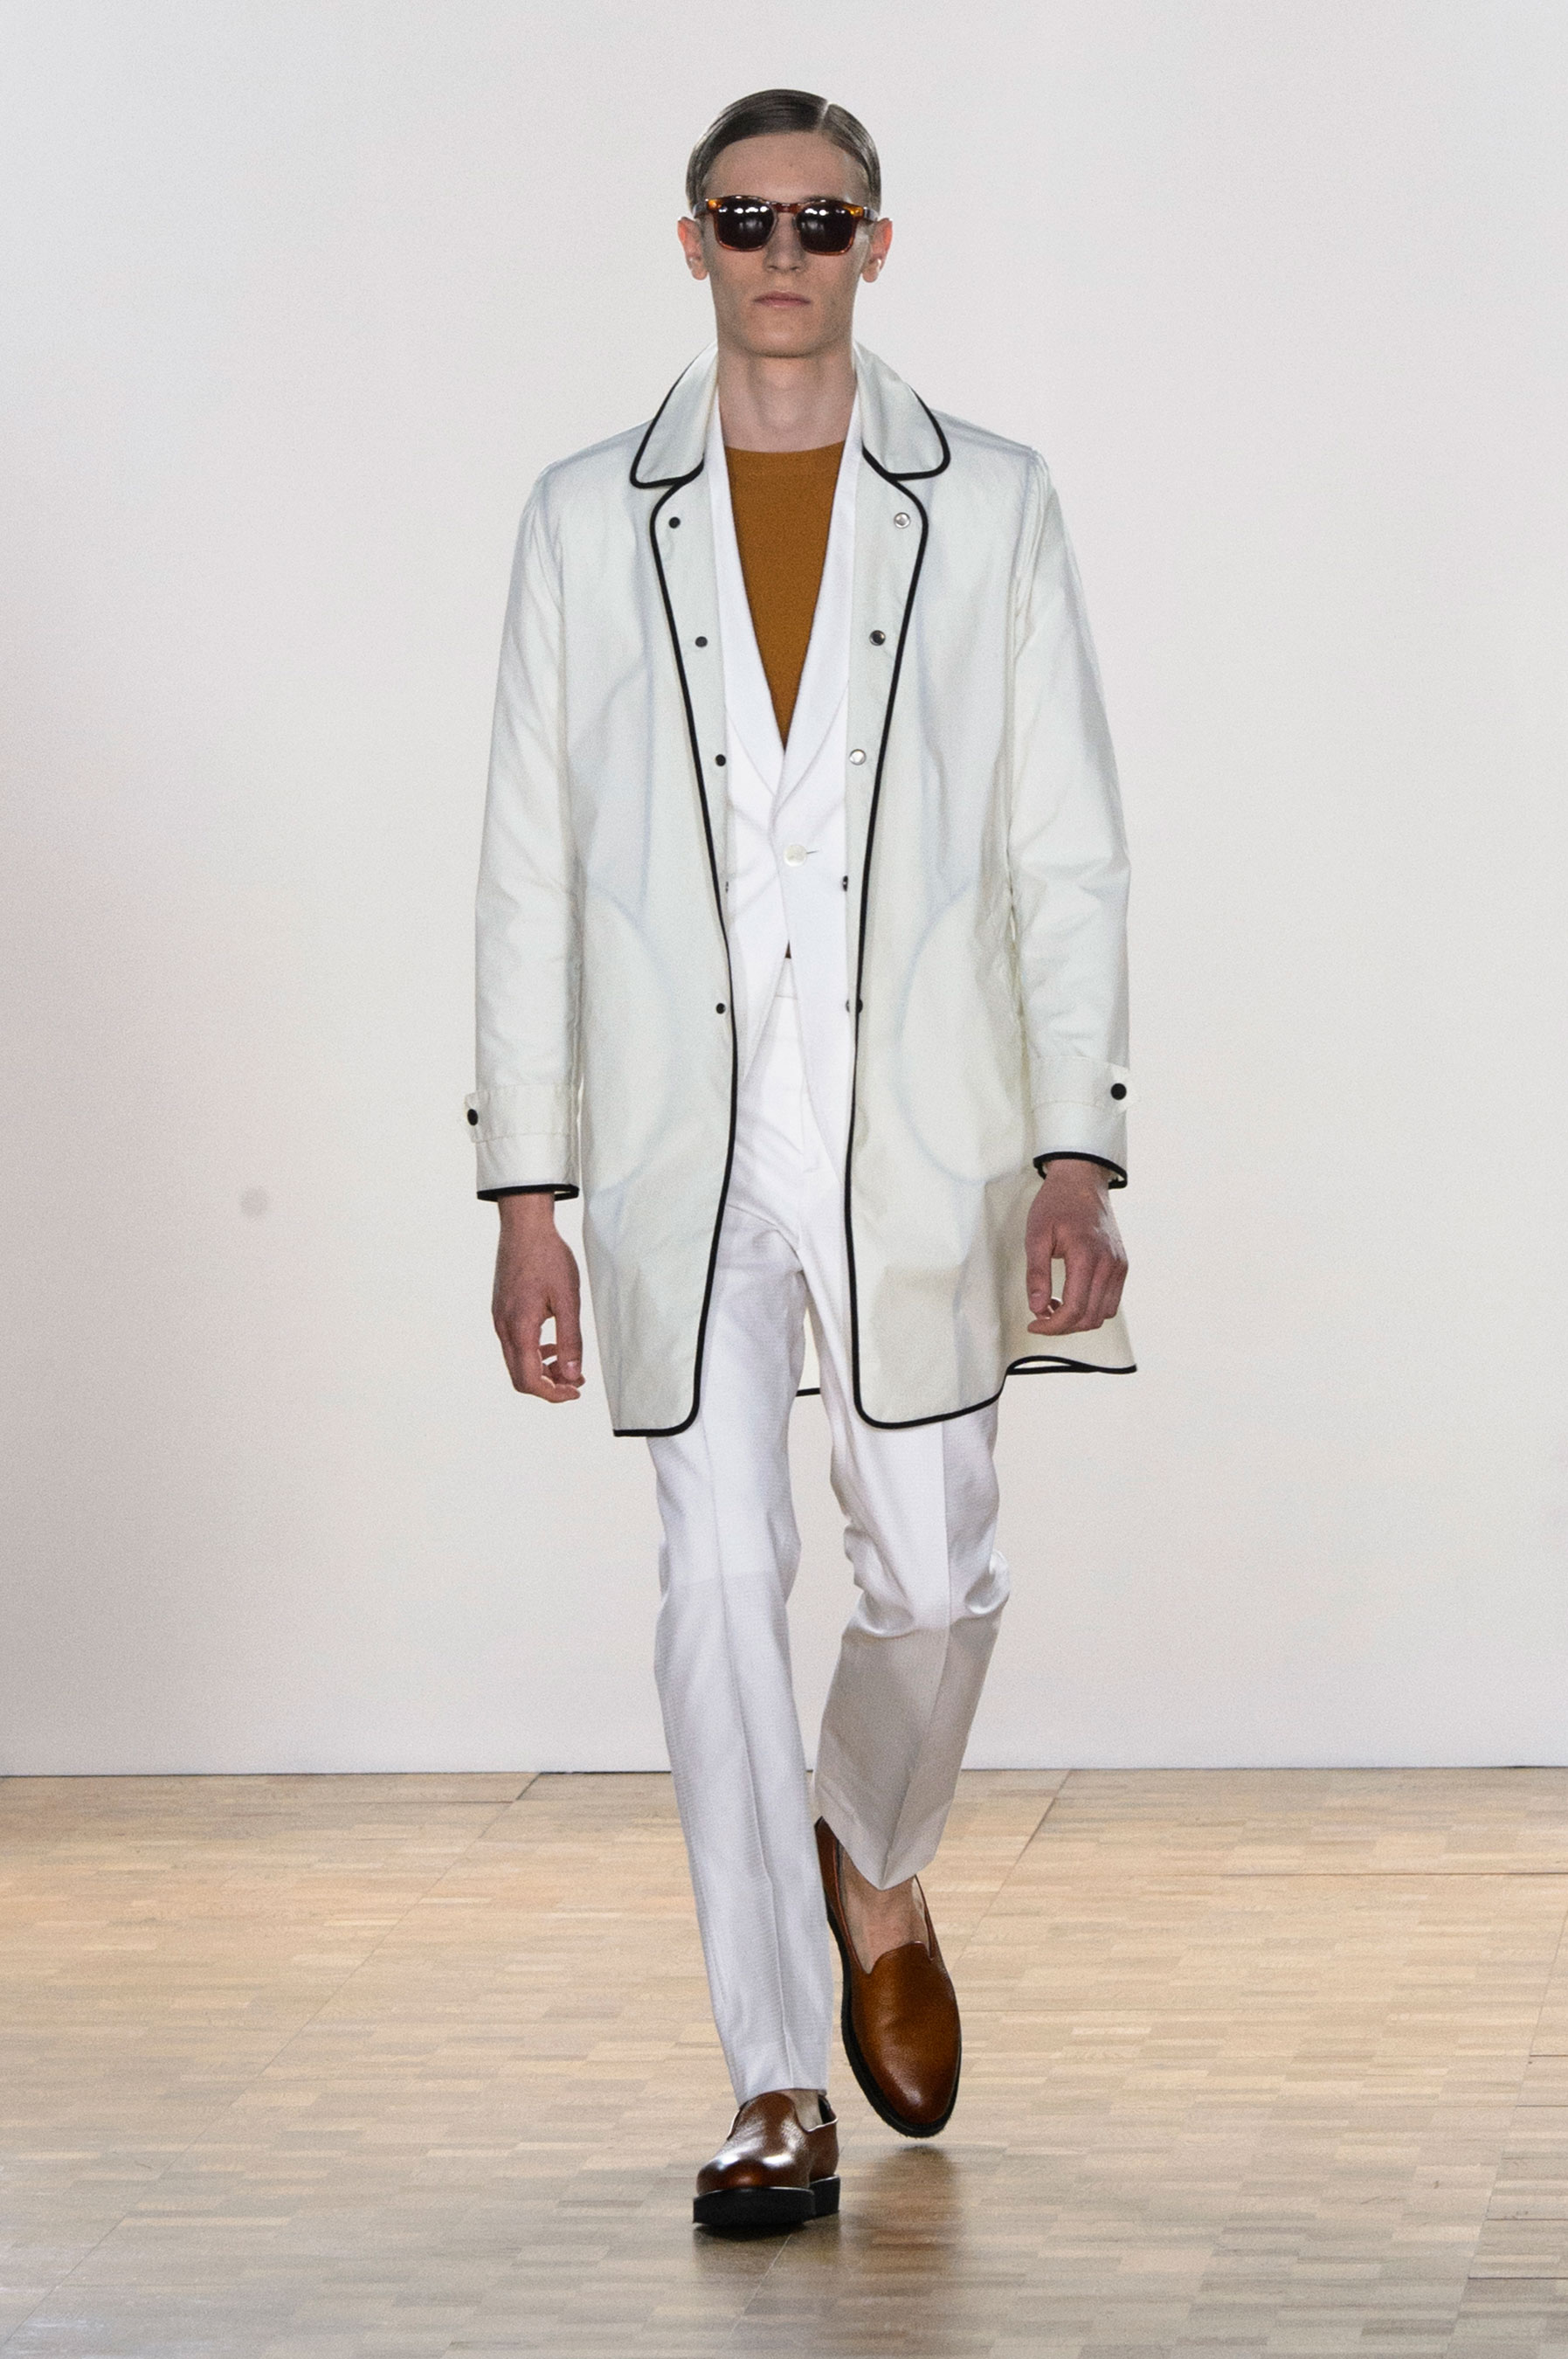 Hardy Amies Spring/Summer 2016 | London Collections: Men